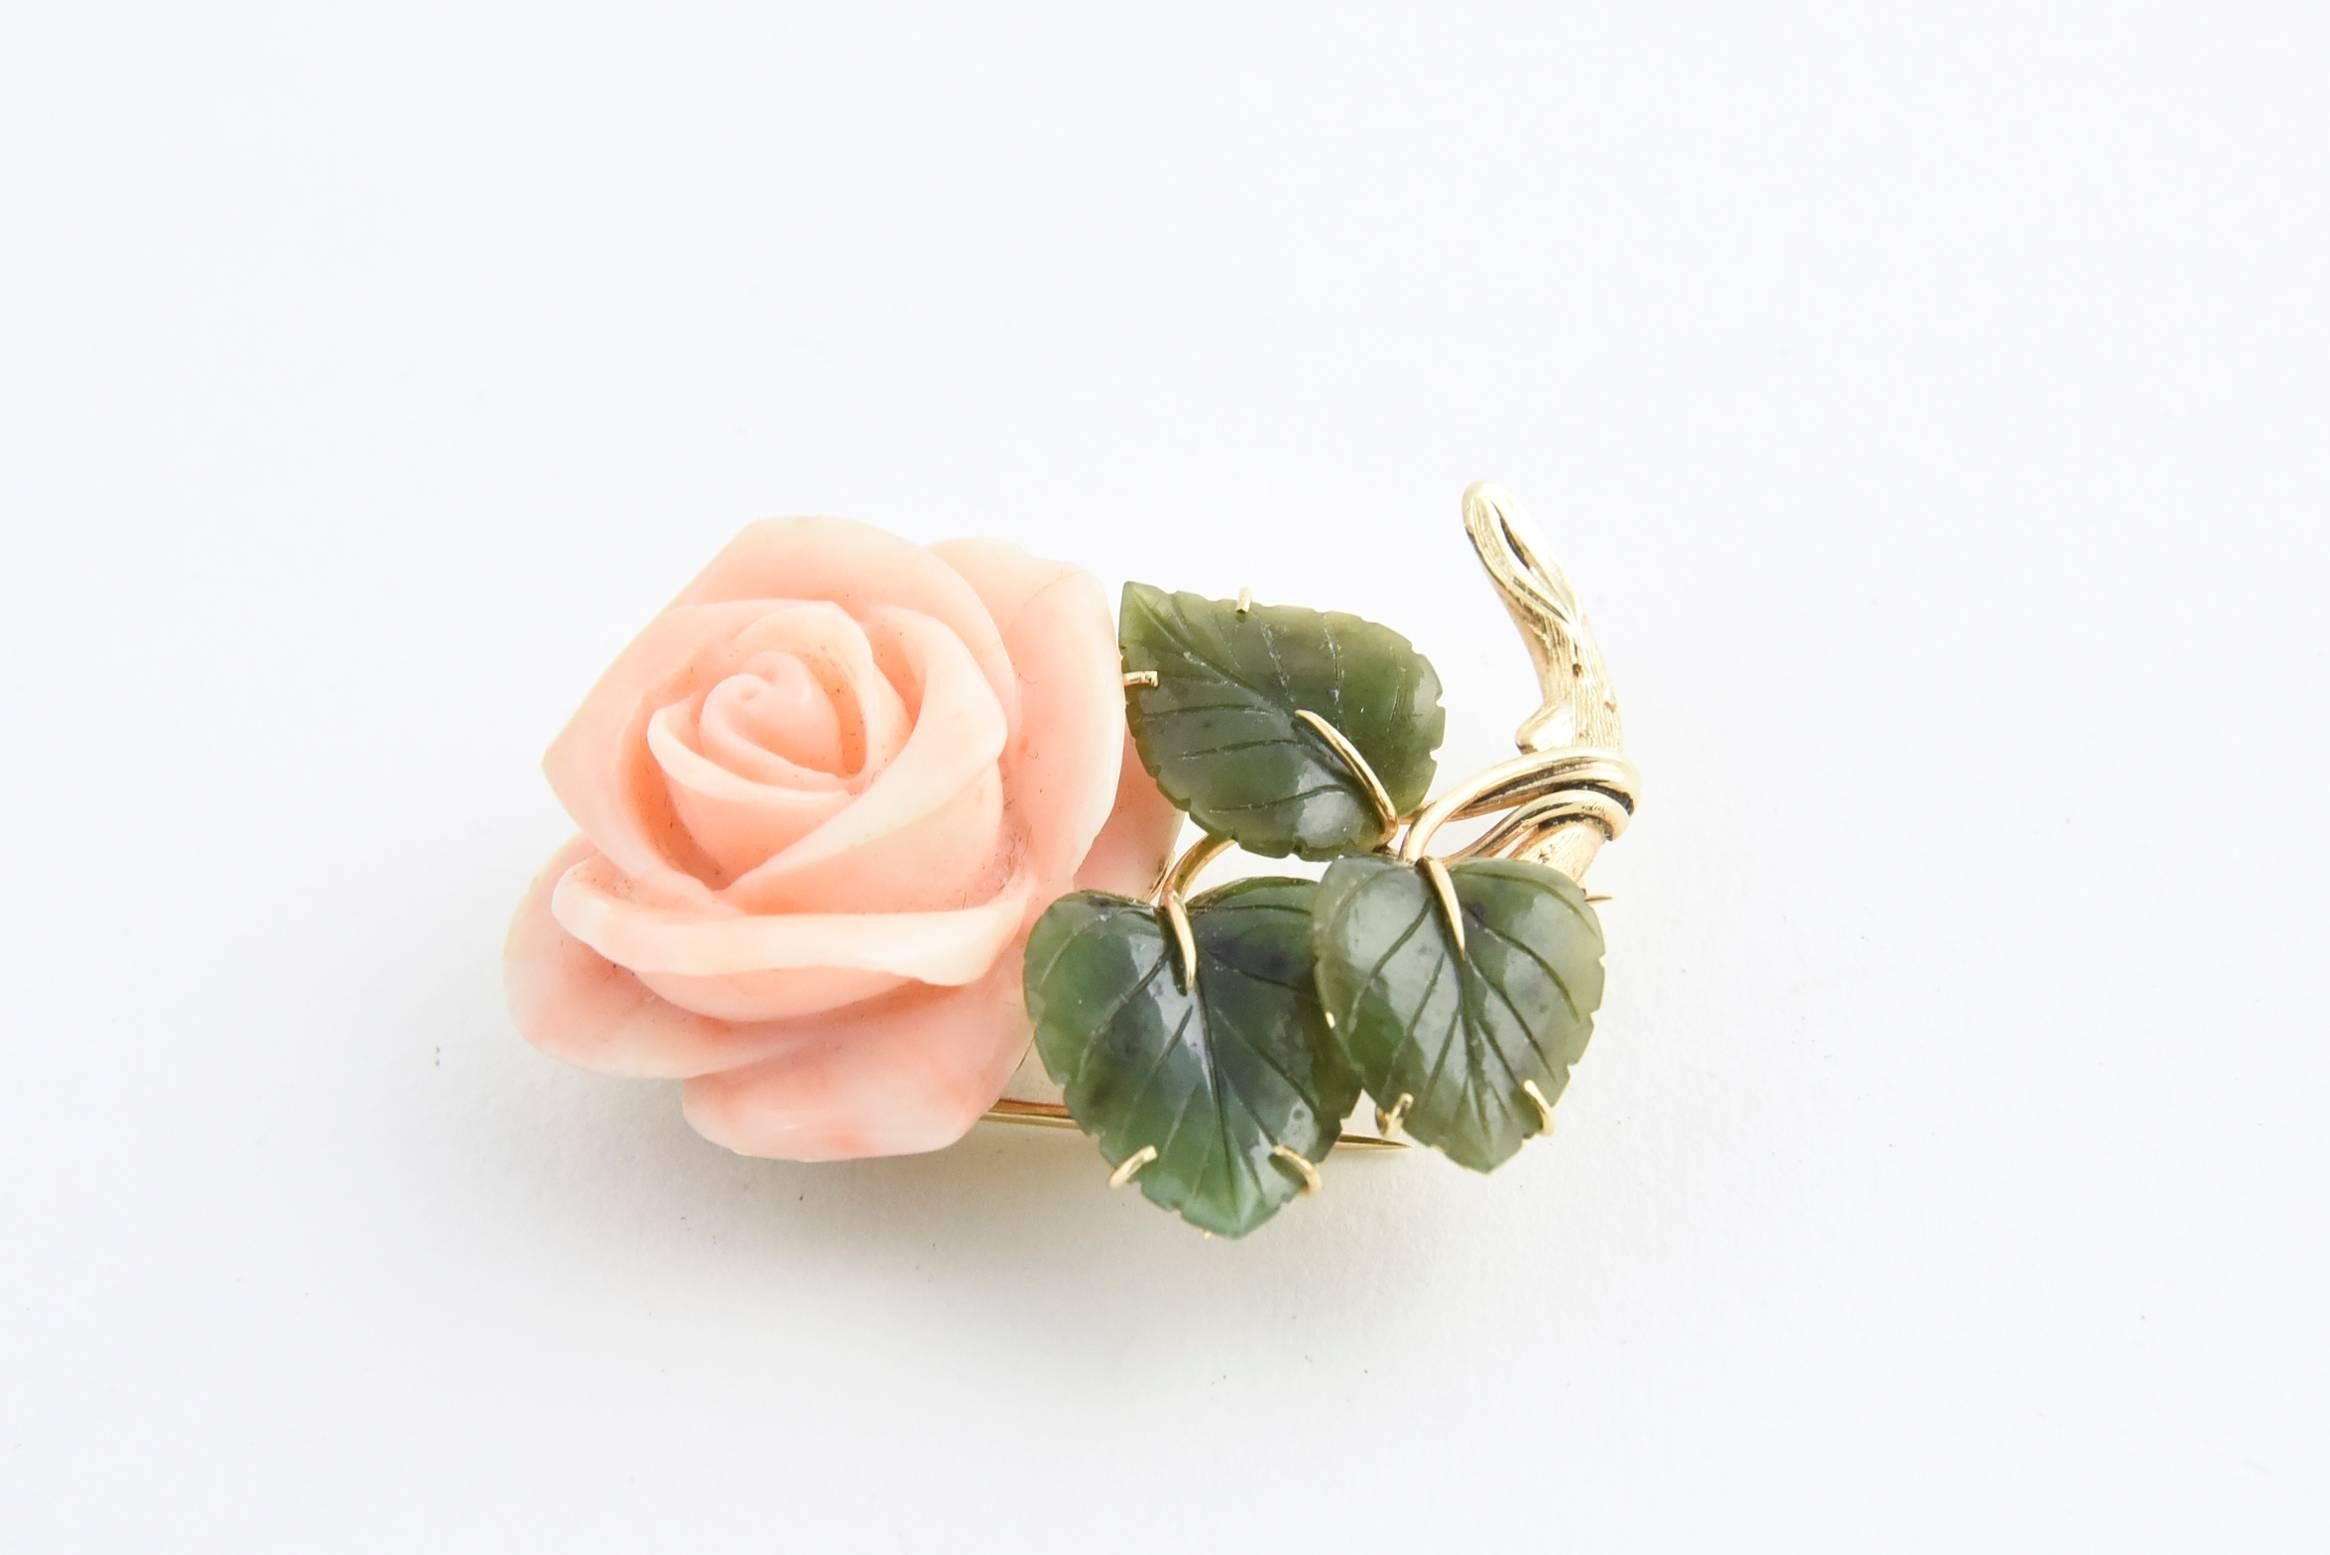 Carved angel skin coral rose with three carved jade leaves mounted in 14K yellow gold. Marked 